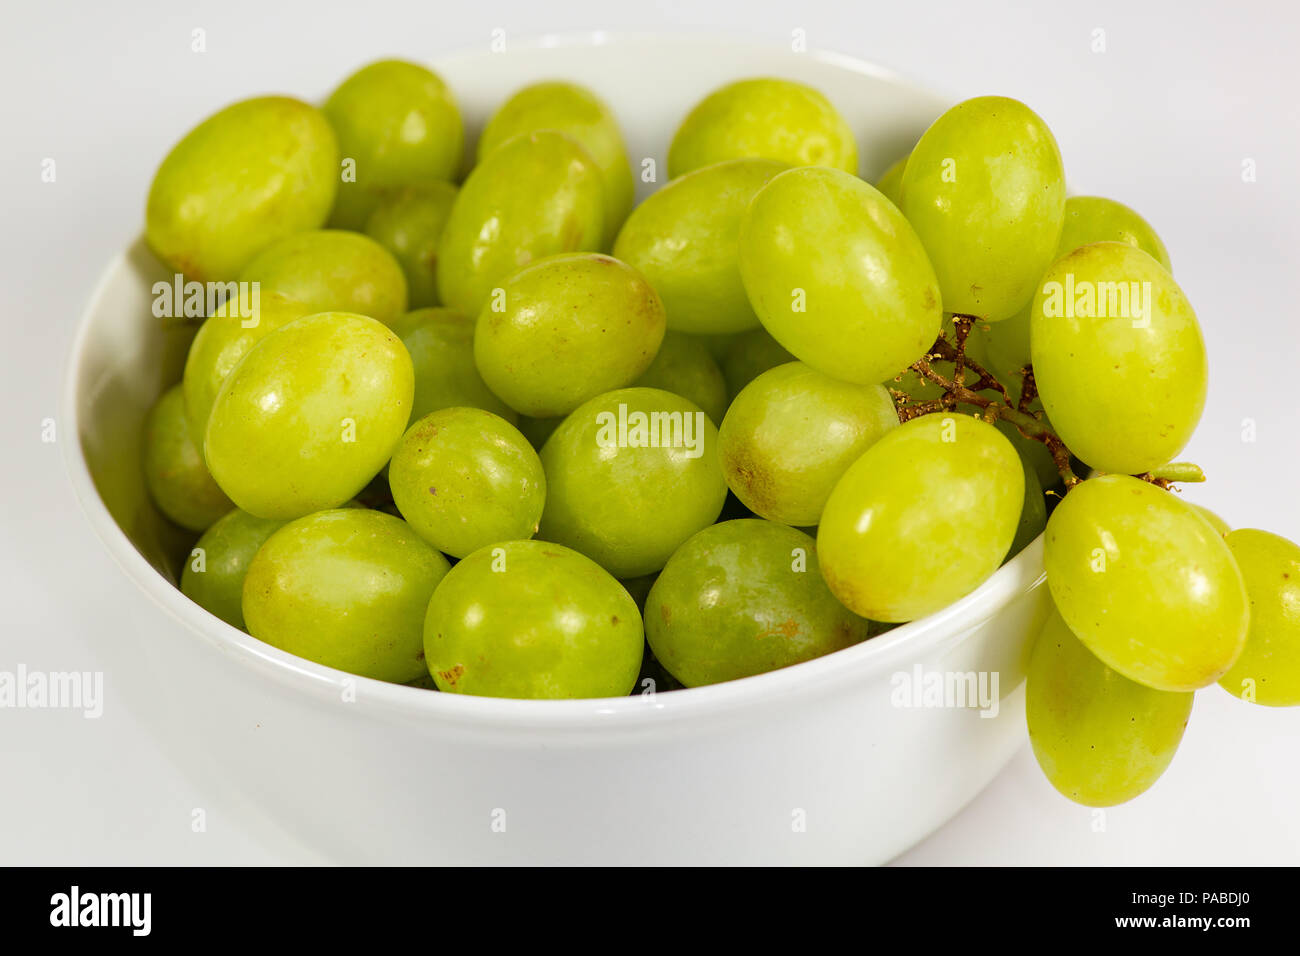 https://c8.alamy.com/comp/PABDJ0/green-seedless-grapes-in-a-deep-white-bowl-on-a-white-tale-waiting-to-be-eaten-PABDJ0.jpg